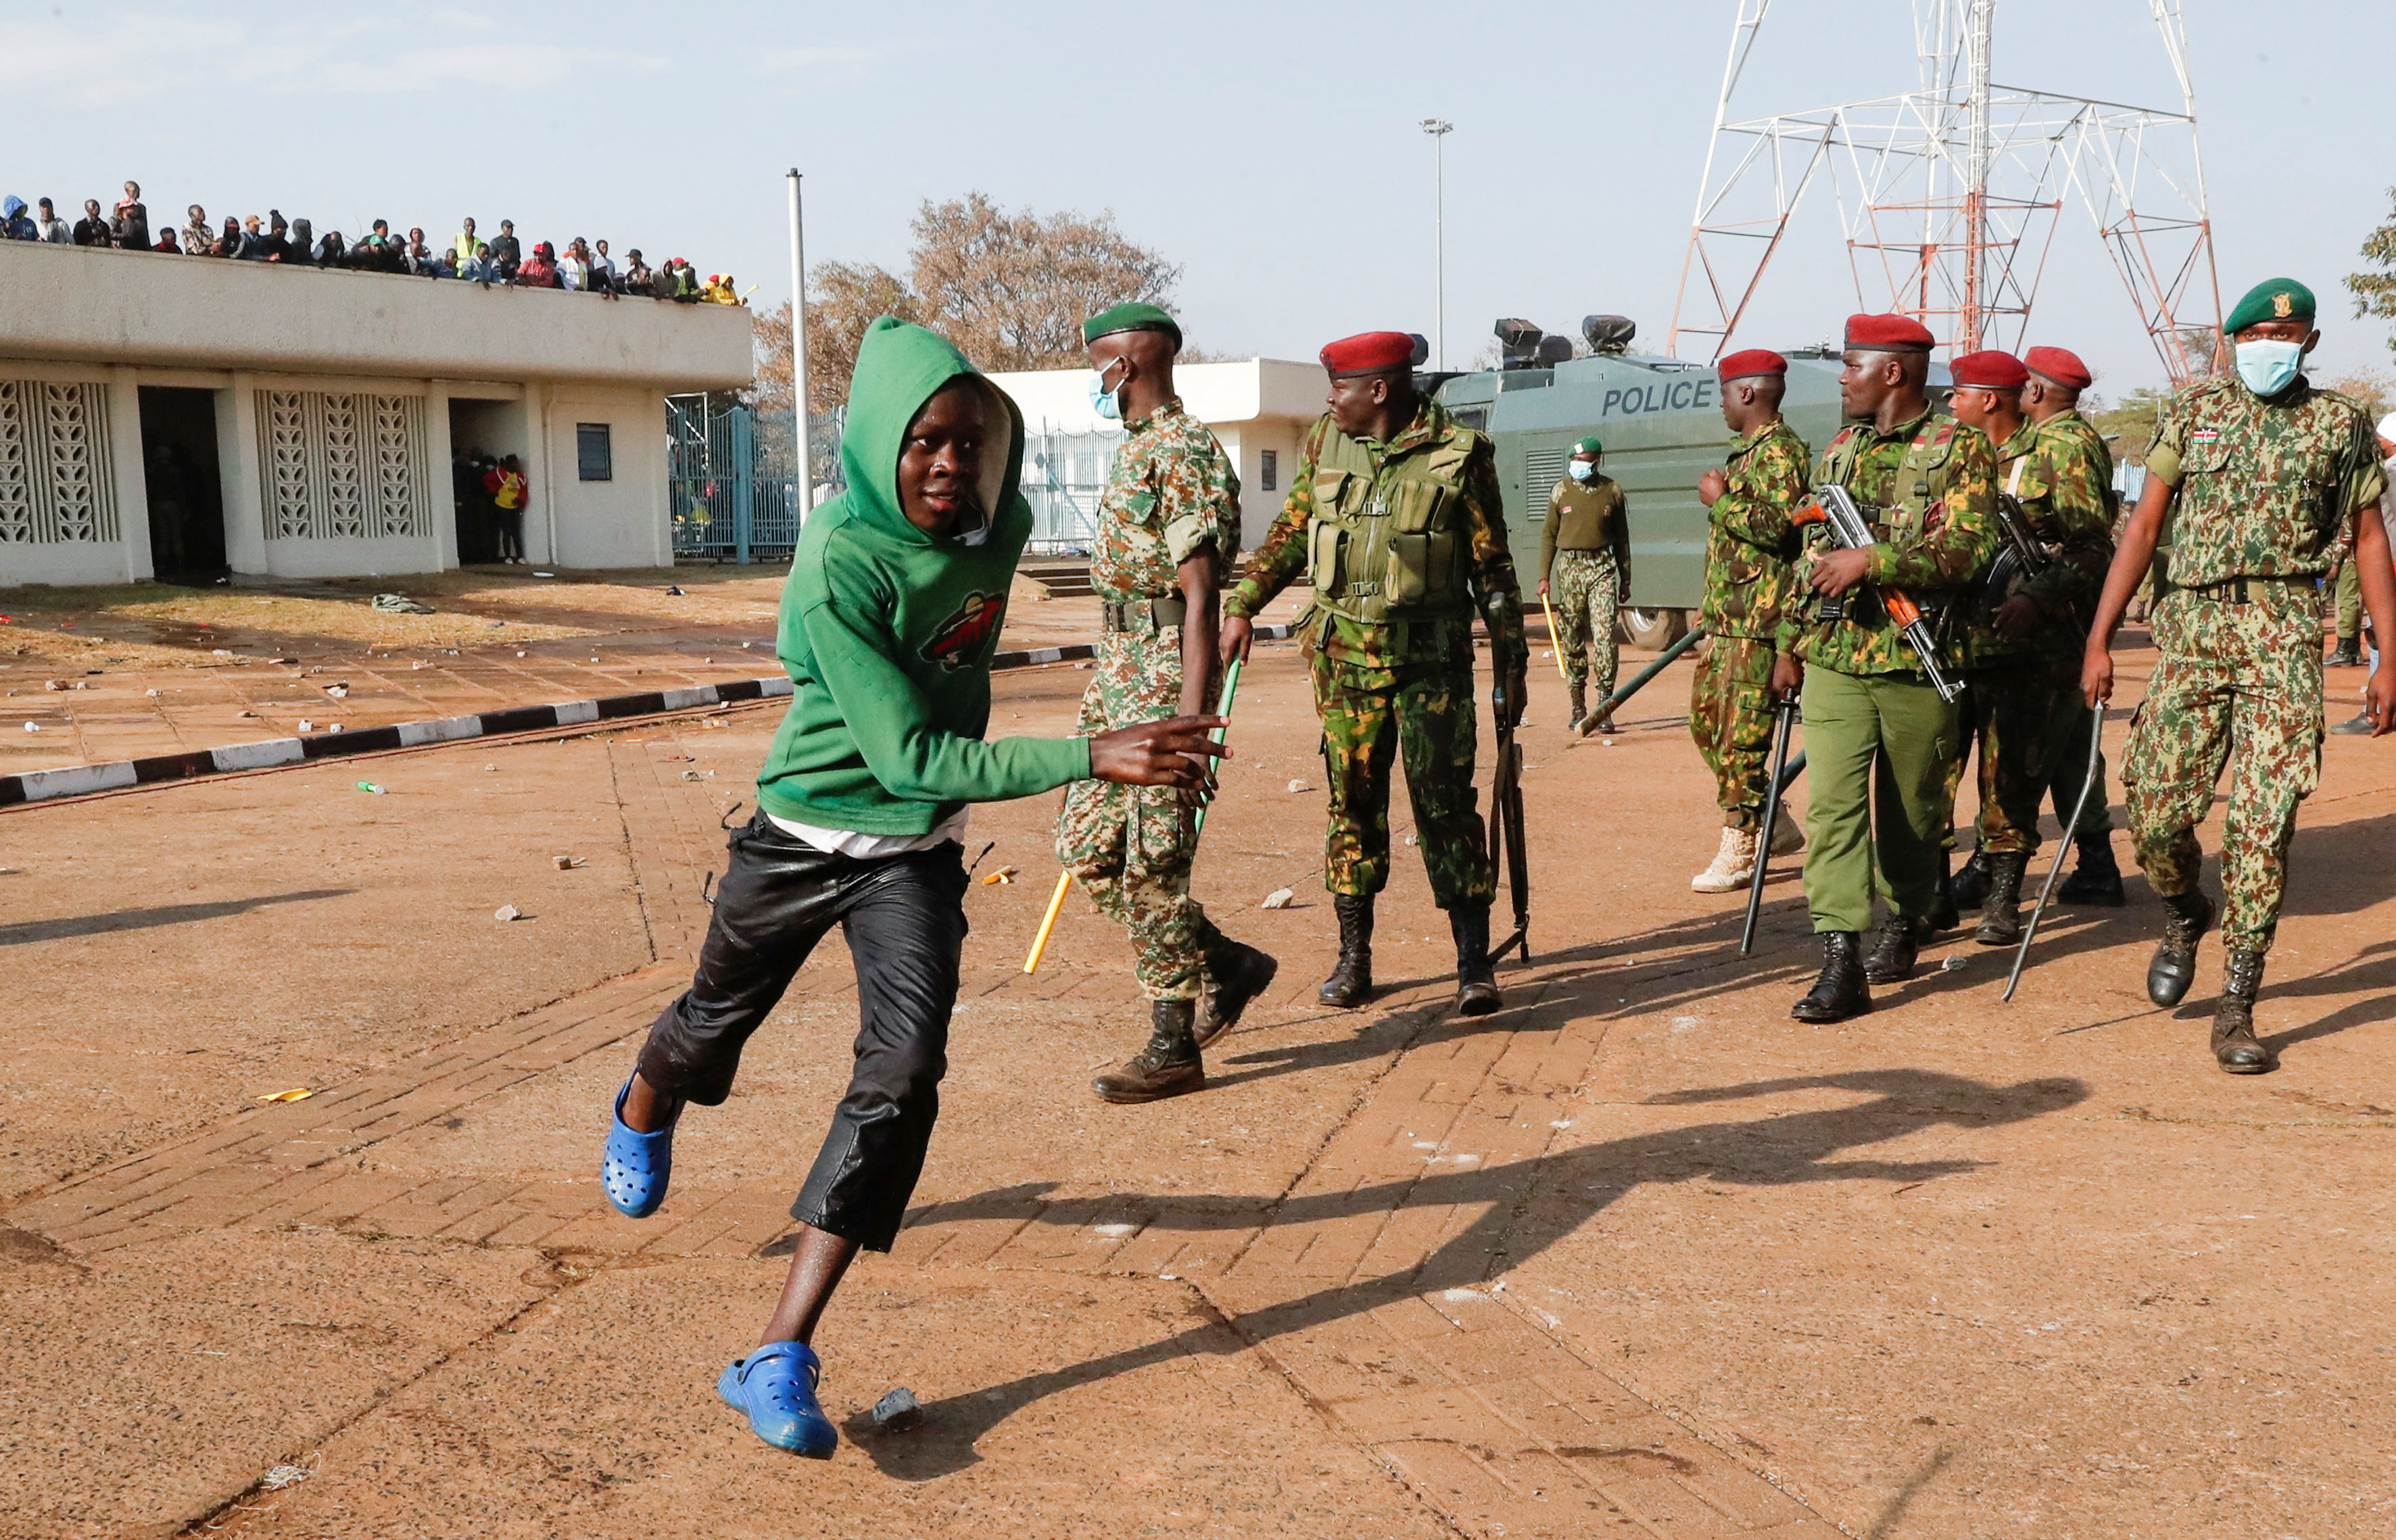 A boy runs past riot police as they attempt to control people jostling to attend the inauguration of Kenya's President William Ruto before his swearing-in ceremony at the Moi International Stadium Kasarani, in Nairobi